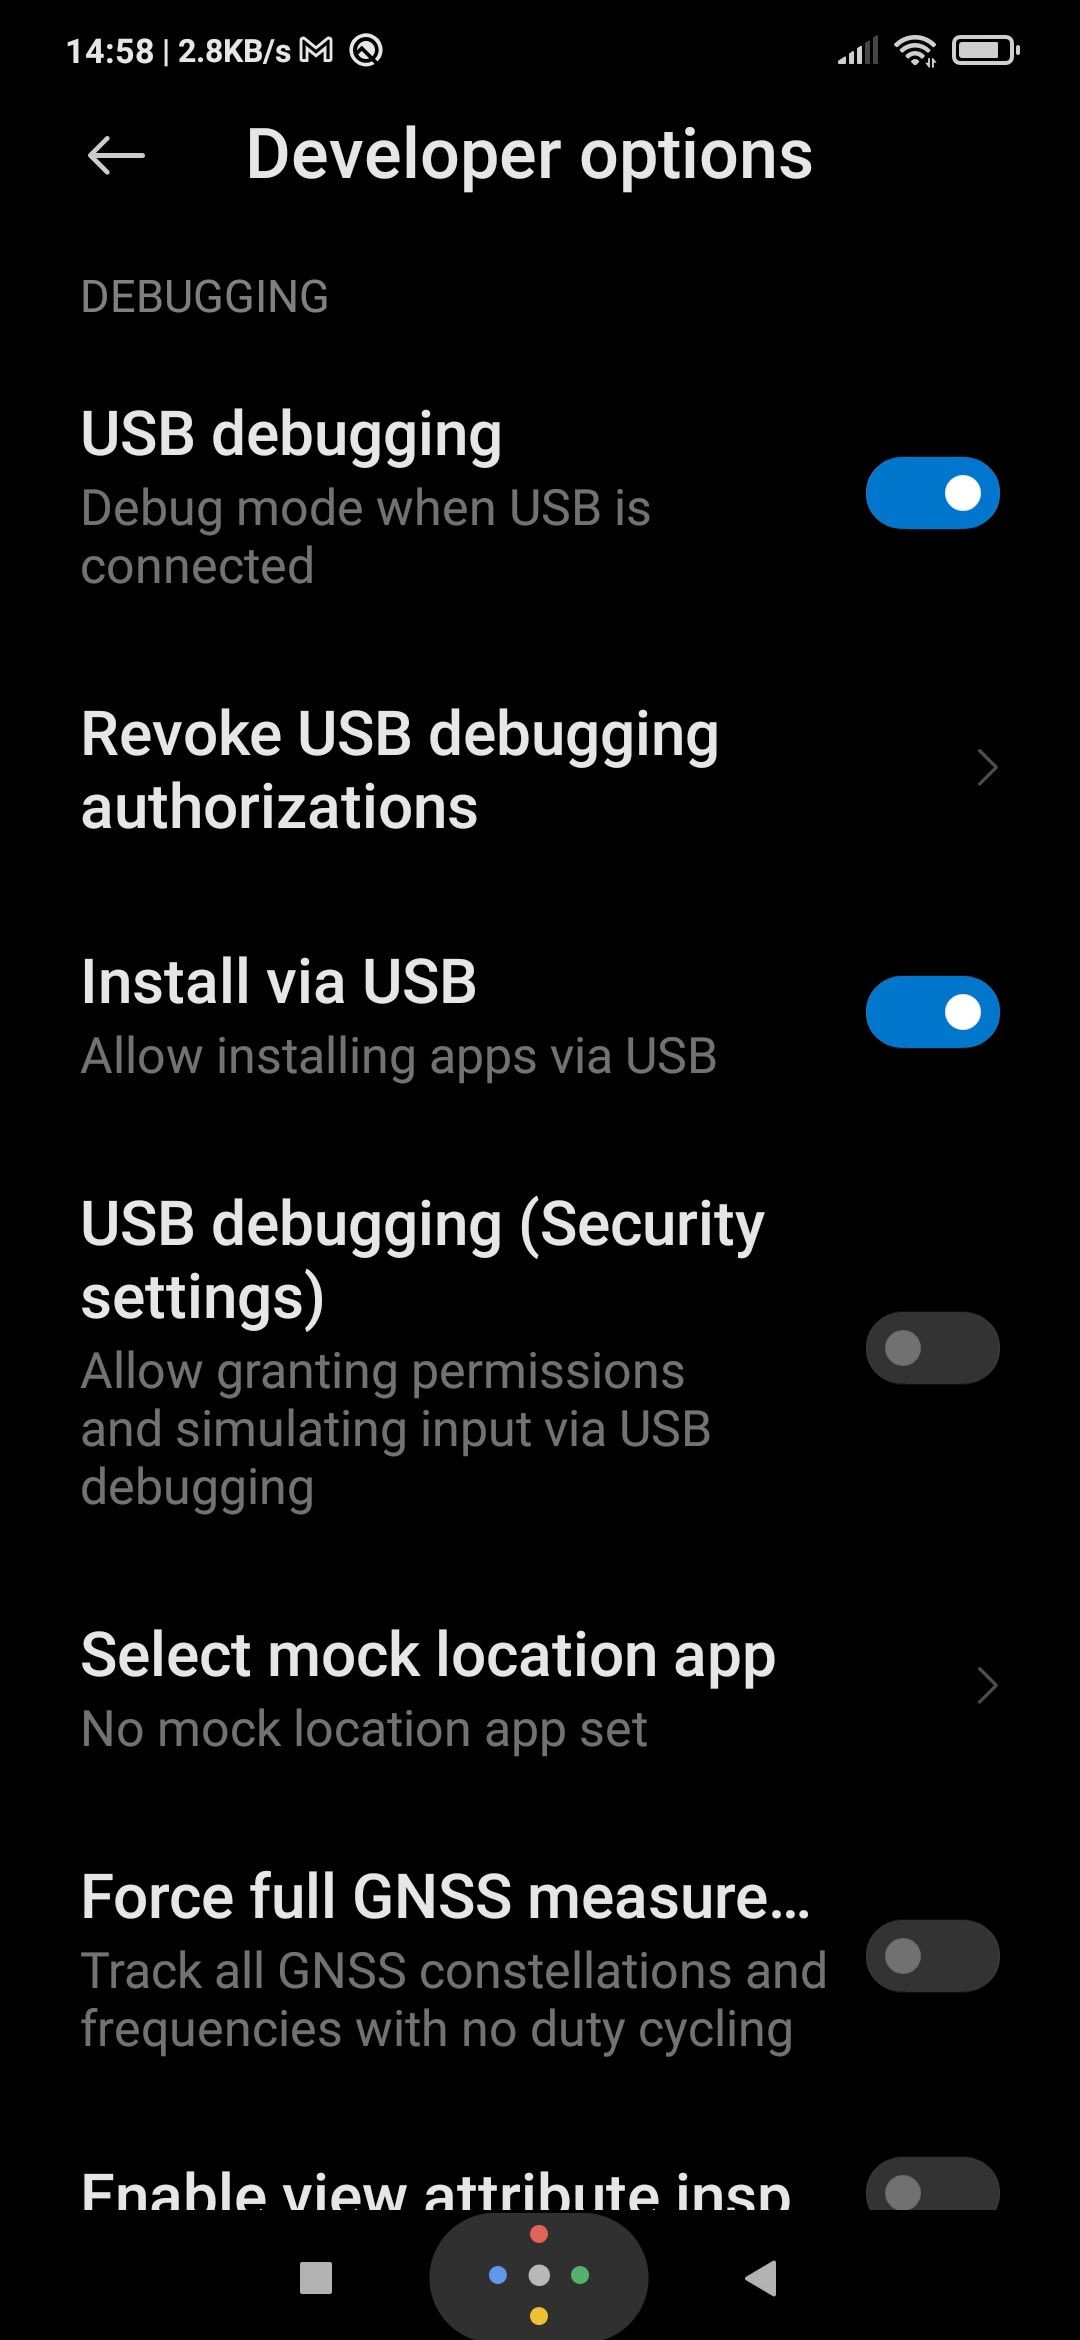 Android's USB debugging setting in Developer options page.